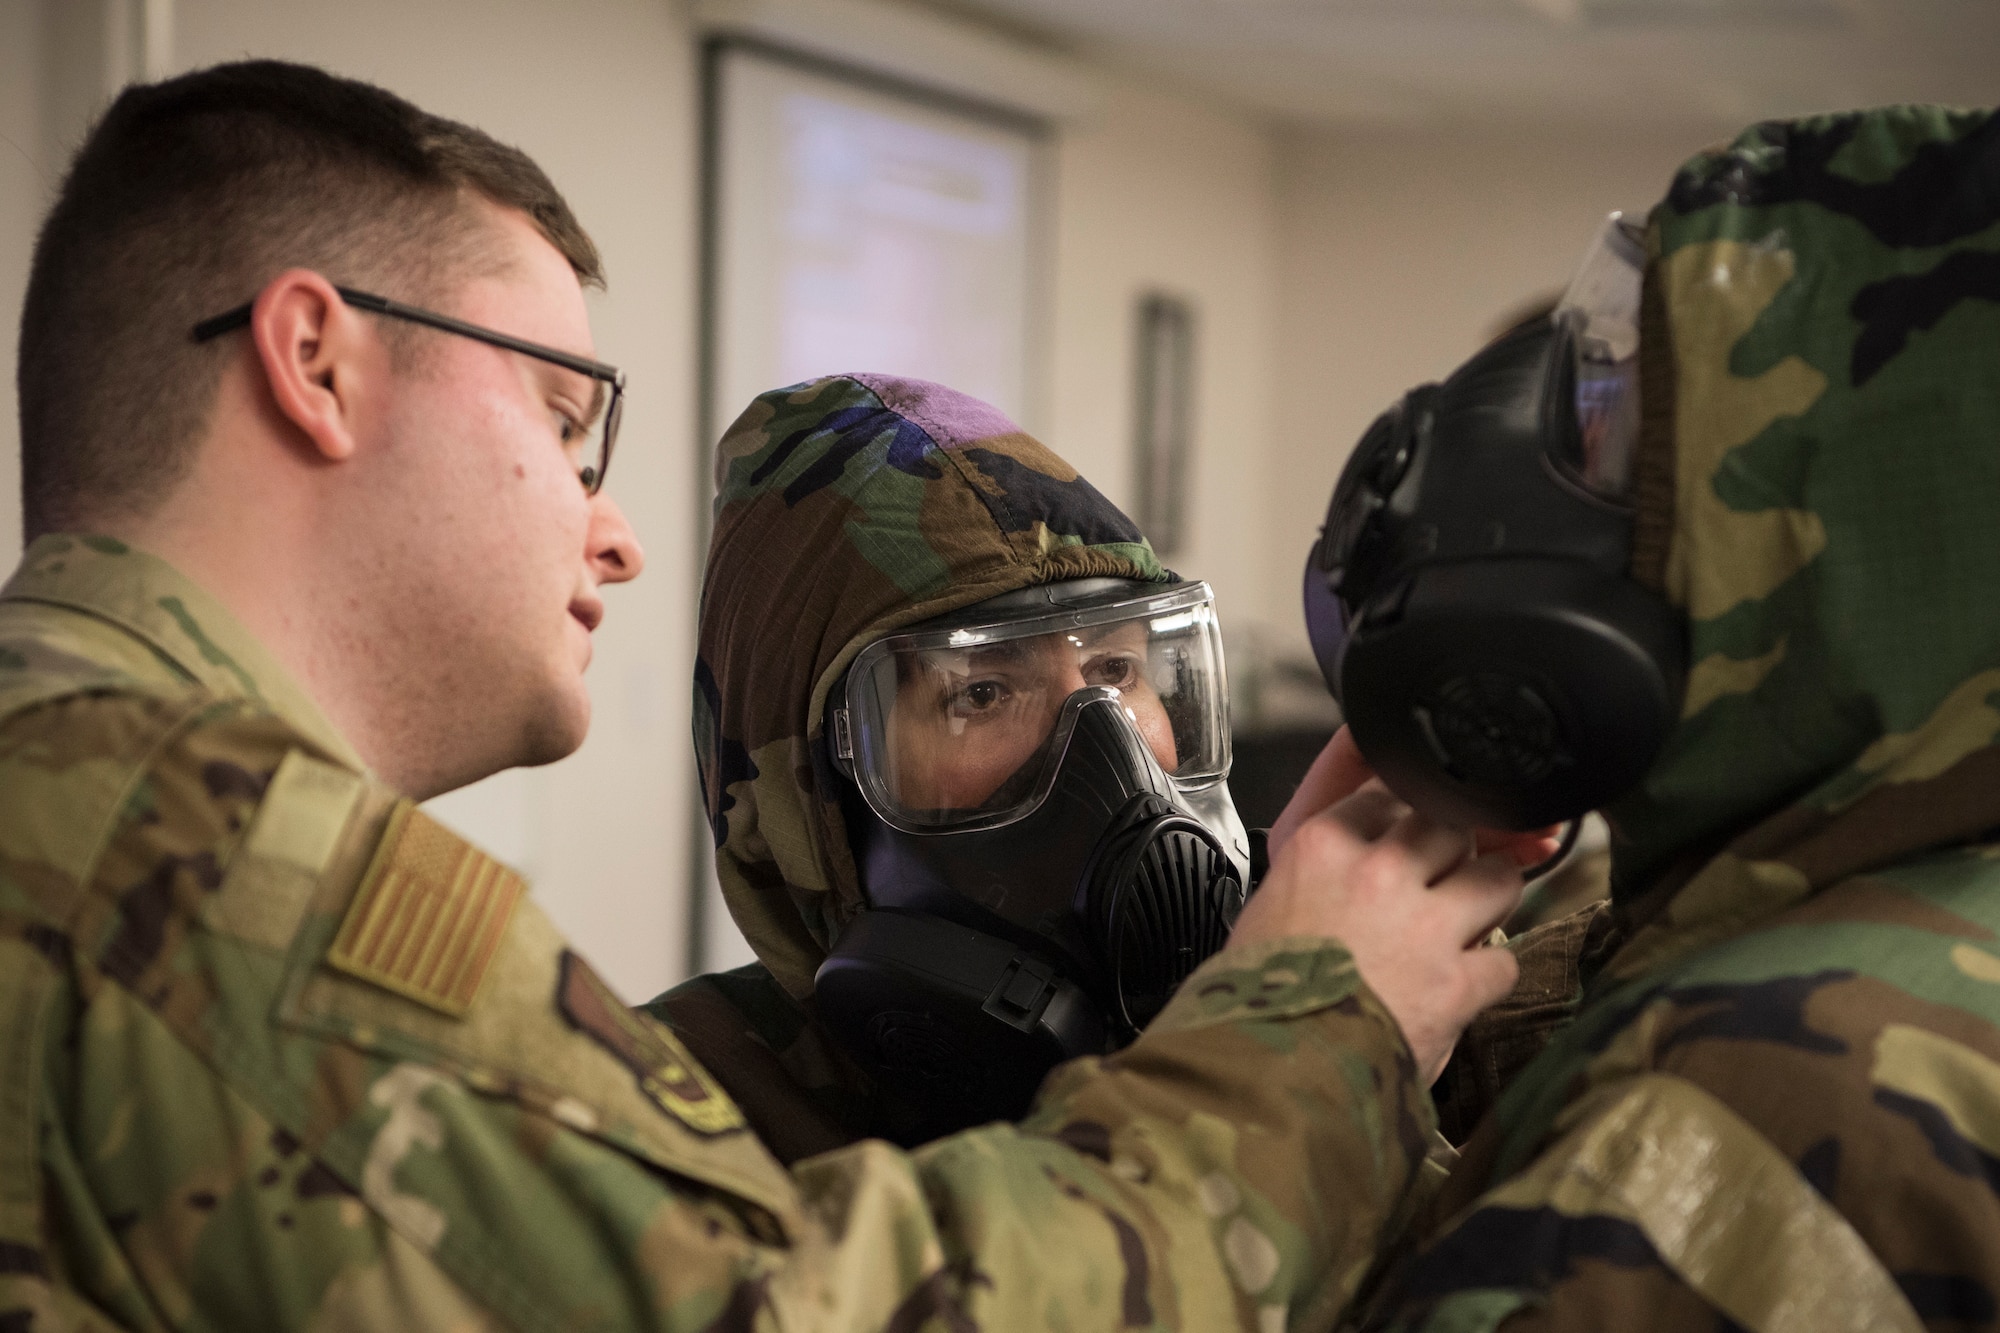 U.S. Air Force Senior Airman Richard Blackburn, 773d CES Emergency Management chemical, biological, radiological and nuclear (CBRN) instructor shows Tech. Sgt. Kasama Slaton, 673d Medical Operations Squadron, how to identify exposures risks to Senior Airman Kolbe Kleinschnitz, 3rd Maintenance Squadron, during a newly-implemented CBRN defense training course at Joint Base Elmendorf-Richardson, Alaska, Jan. 8, 2019. One of the key changes made embraces the reintegration of hands-on, in-person instruction, and reduces computer based training, allowing Airmen to receive a more tailored learning experience. (U.S. Air Force photo by Airman 1st Class Crystal A. Jenkins)